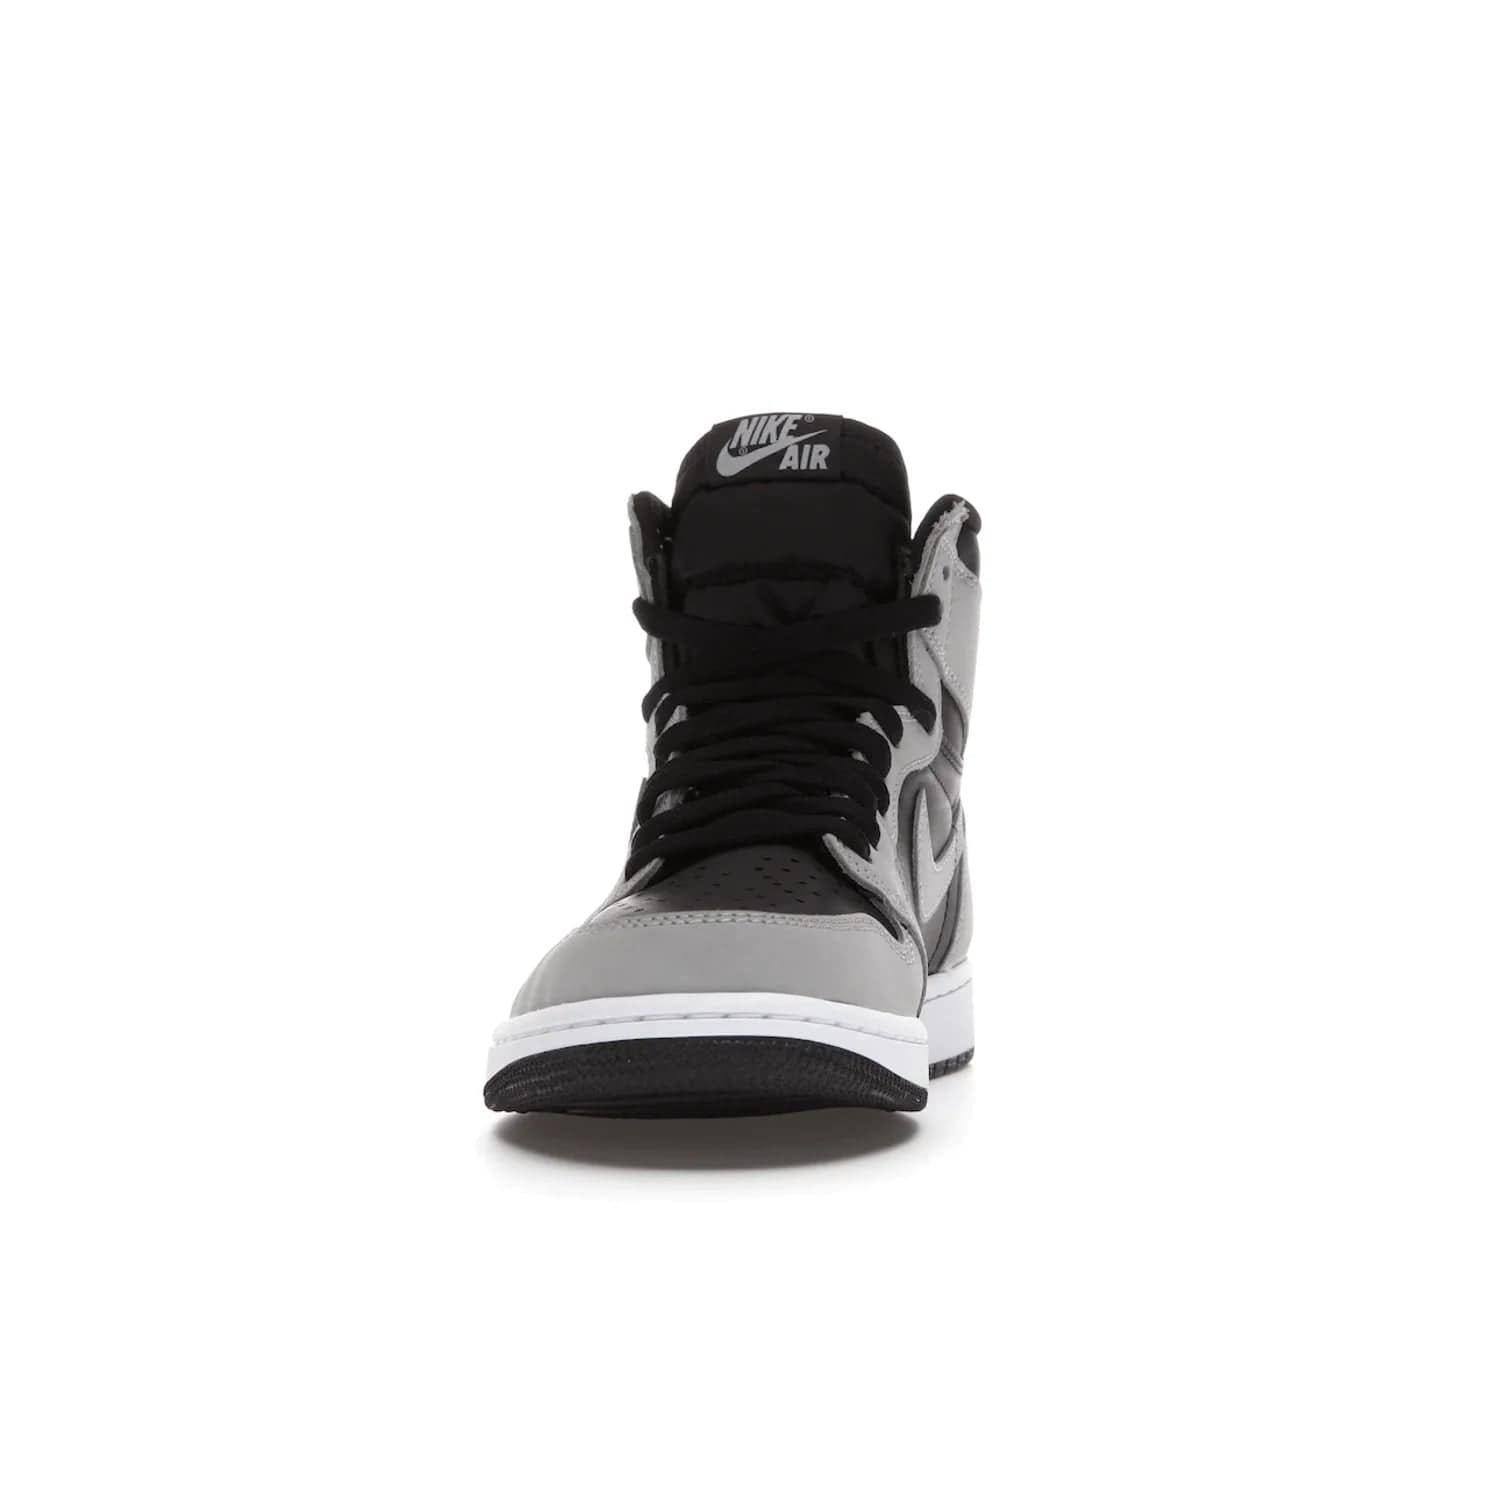 Jordan 1 Retro High Shadow 2.0 - Image 11 - Only at www.BallersClubKickz.com - #
Classic Air Jordan 1 Retro High Shadow 2.0 with black leather base and Light Smoke Grey overlays. Released in May 2021.